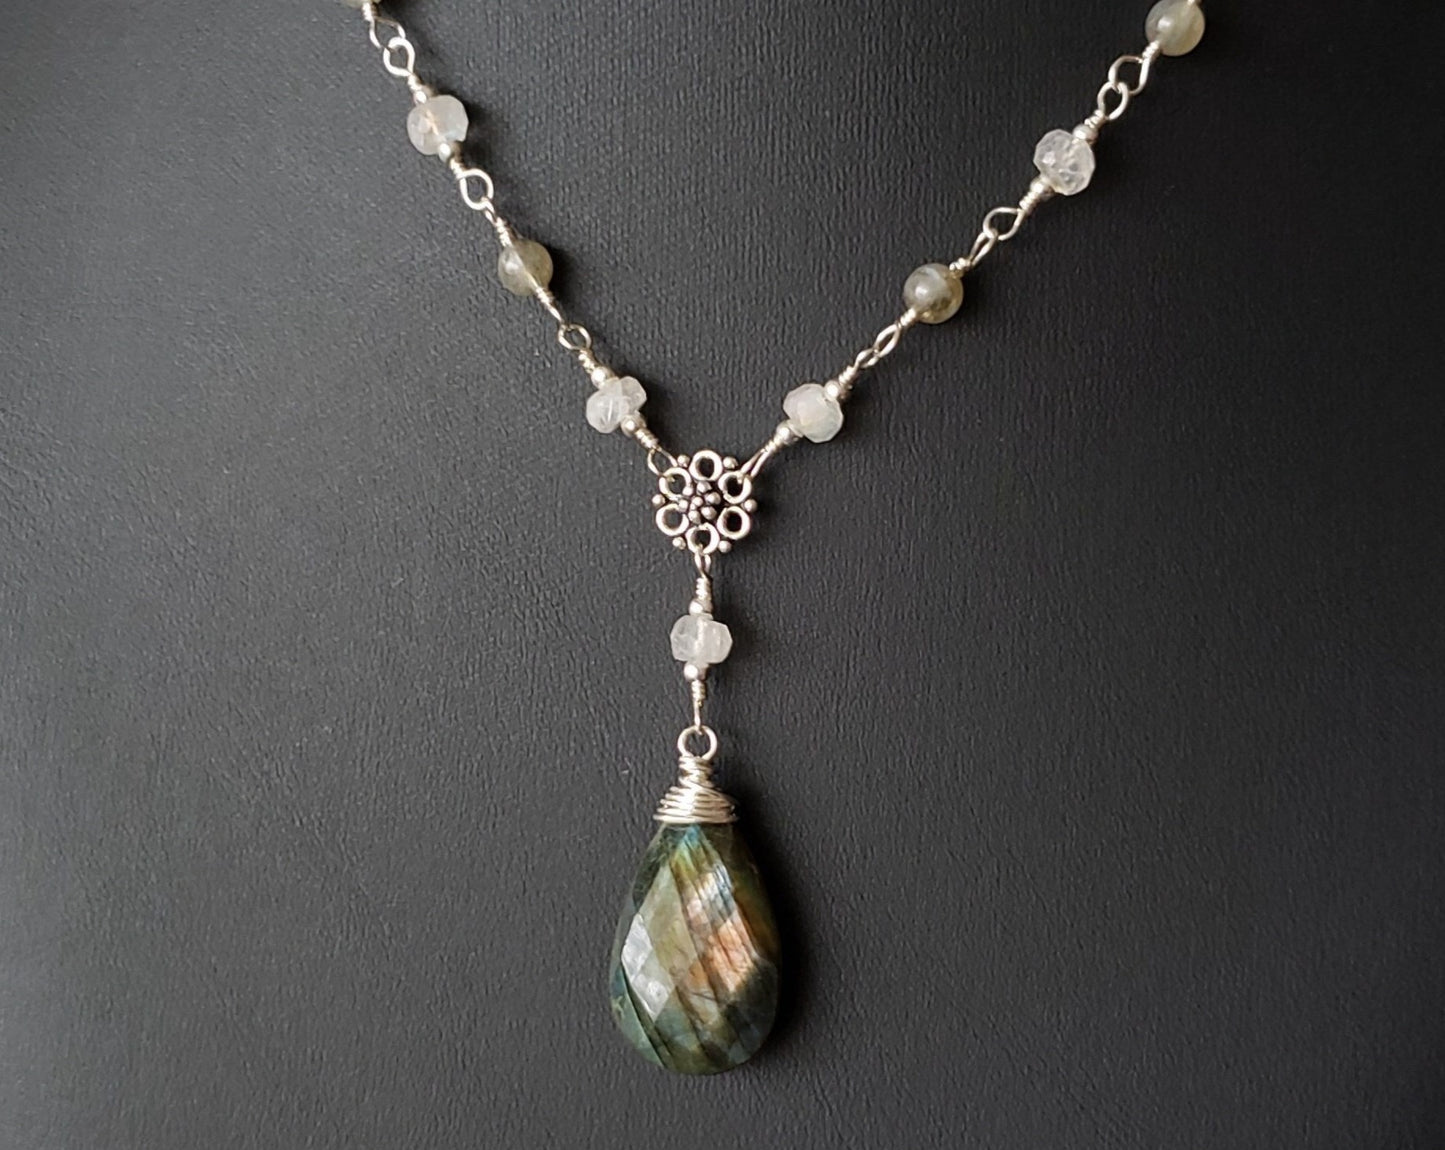 Art Deco Inspired Sterling Silver, Labradorite & Moonstone Necklace with large centre drop shaped faceted Labradorite stone. 